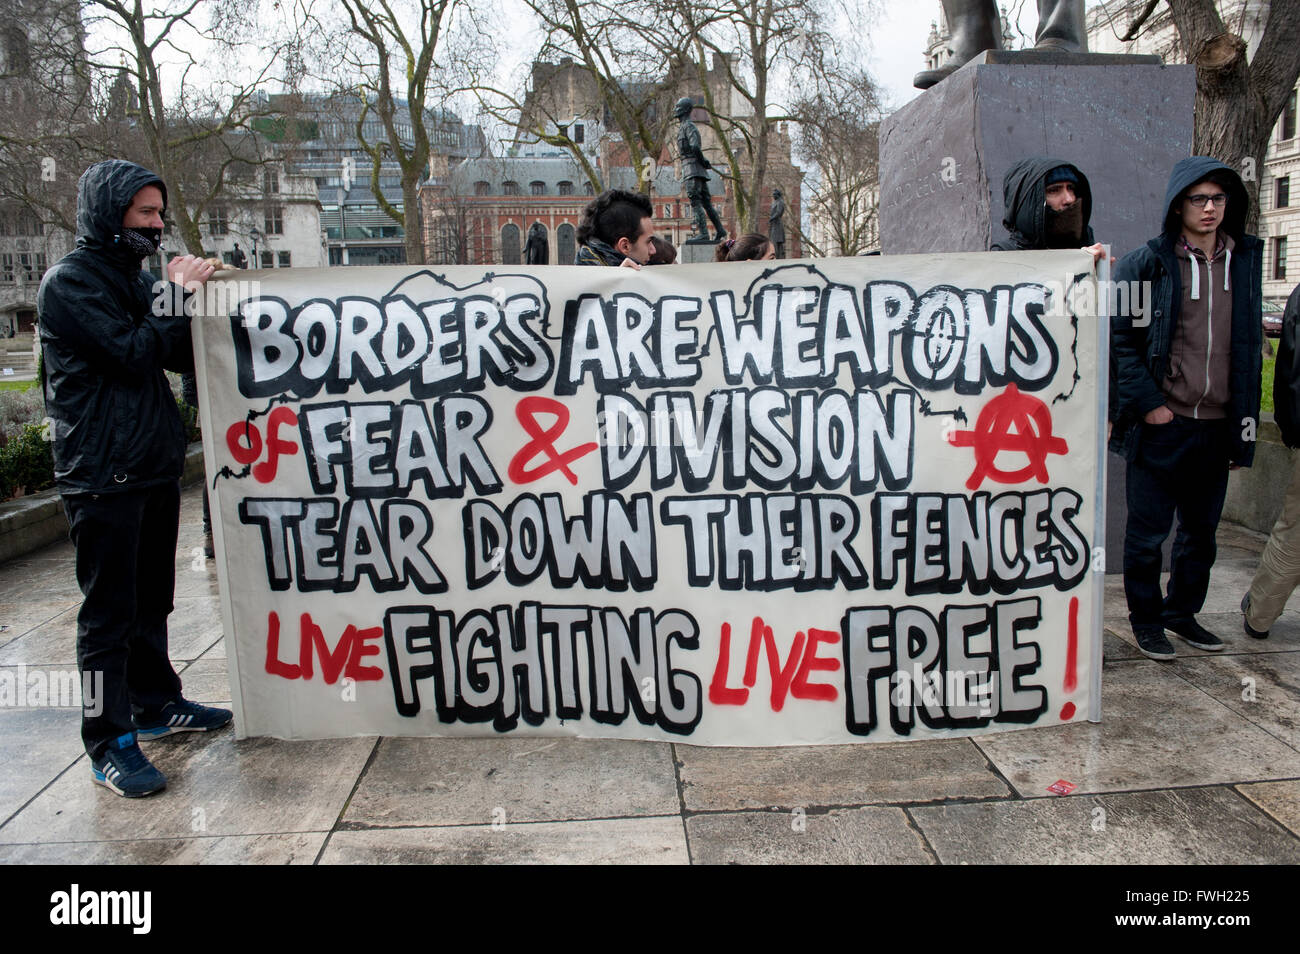 activists-from-refugees-welcome-no-borders-and-london-2-calais-groups-FWH225.jpg